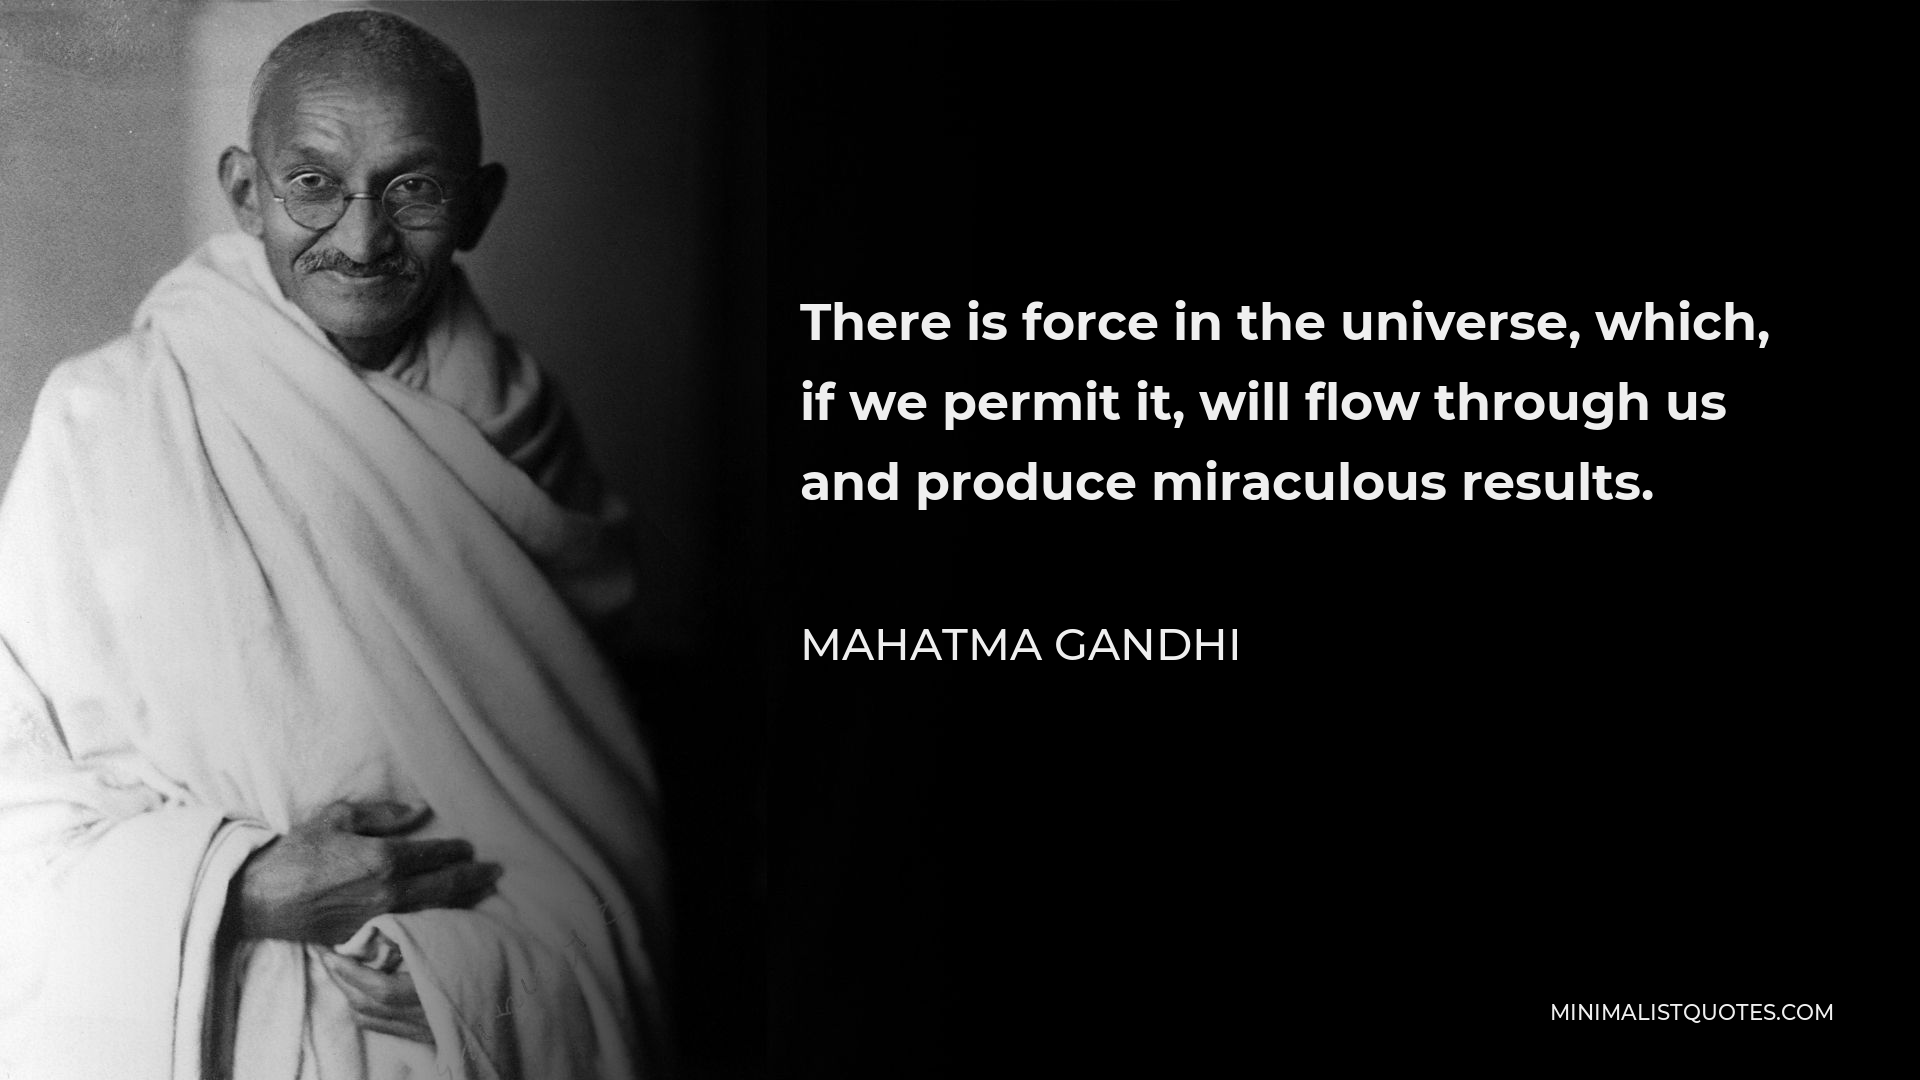 Mahatma Gandhi Quote - There is force in the universe, which, if we permit it, will flow through us and produce miraculous results.